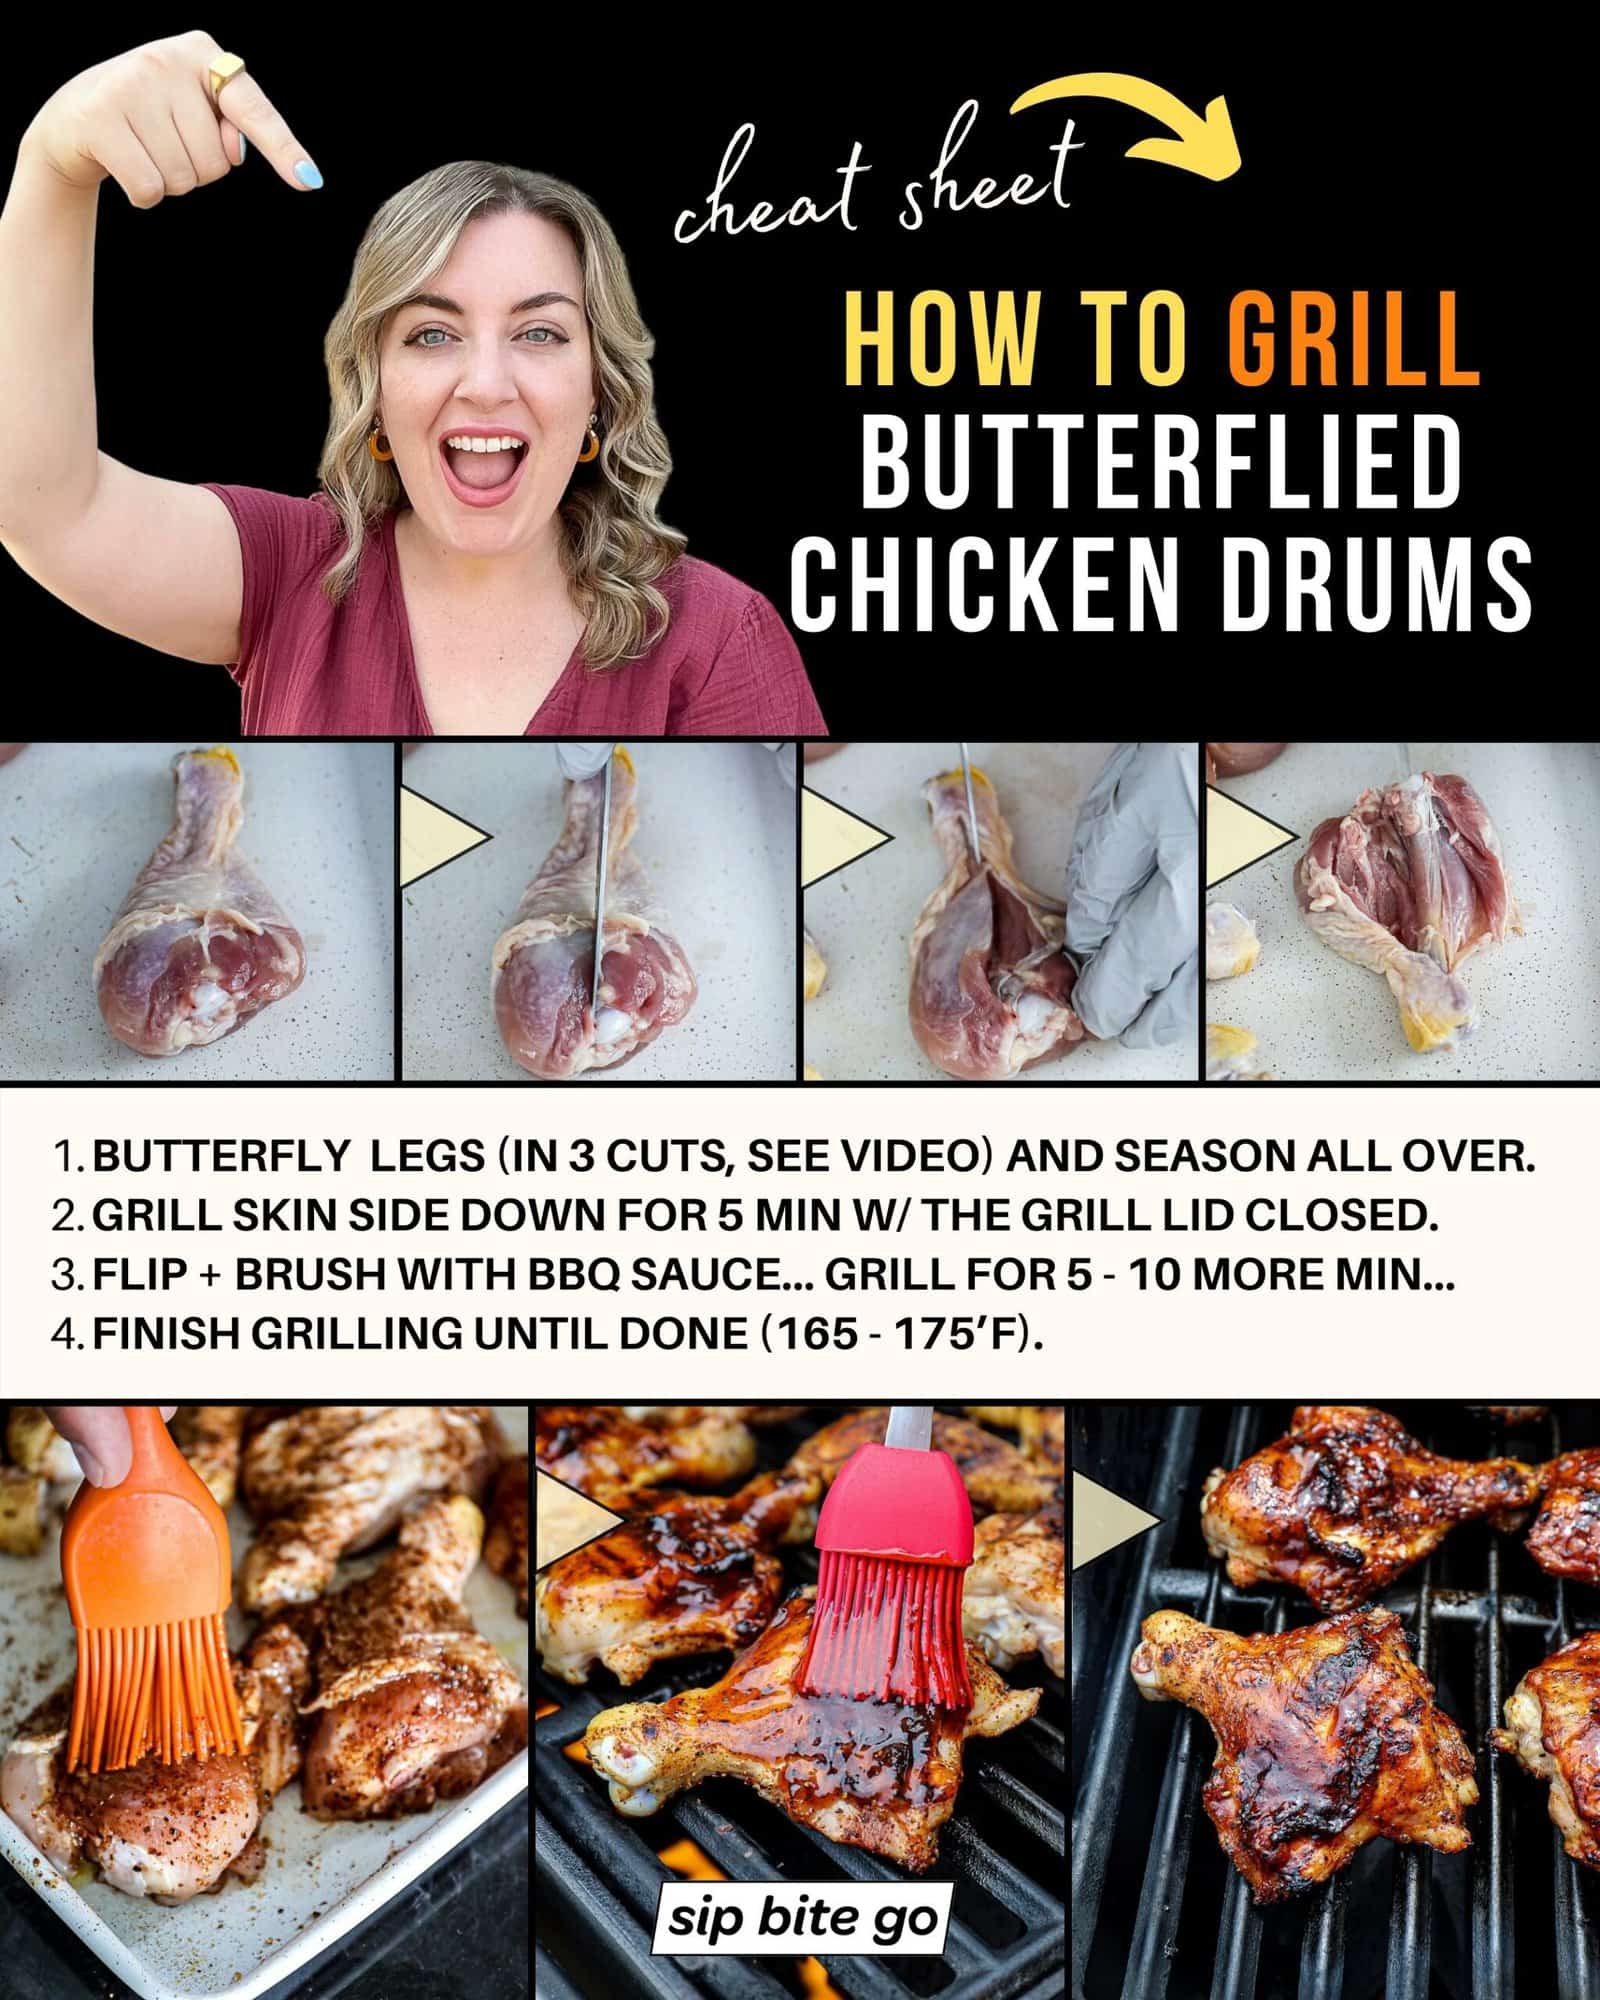 Infographic with recipe steps and captions for how to grill butterflied chicken drums with Jenna Passaro grilled food blogger Sip Bite Go